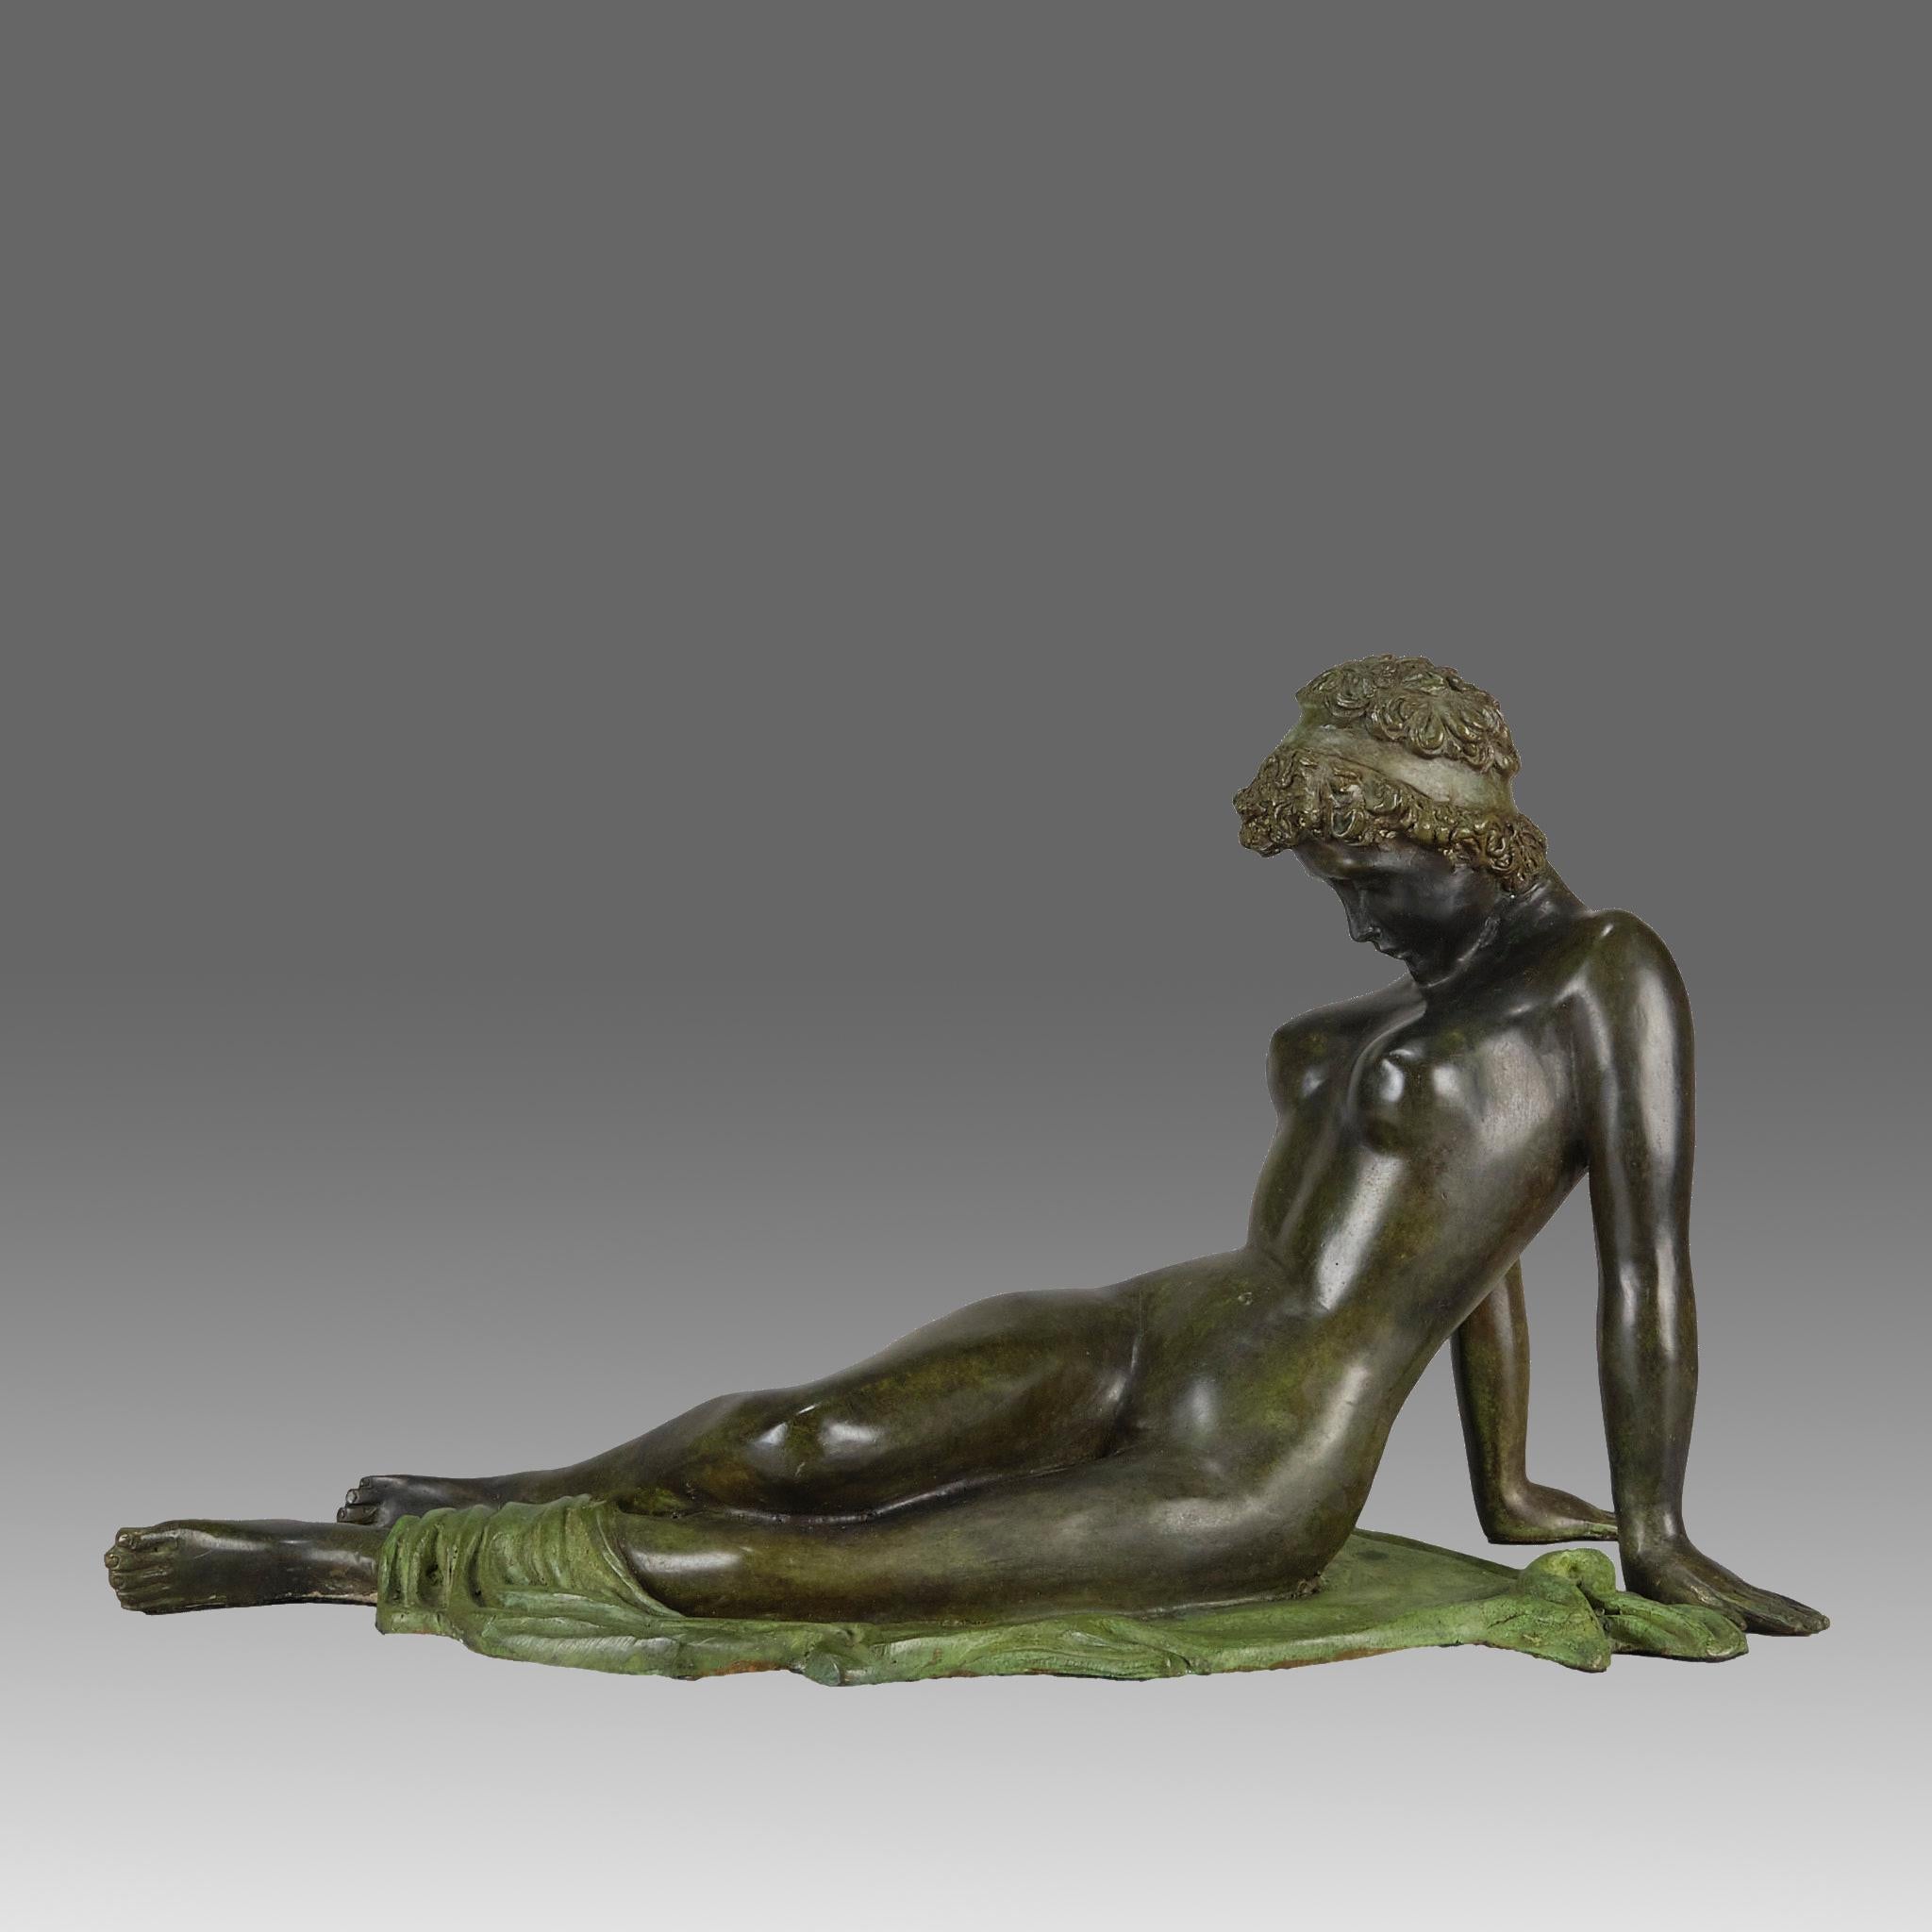 A very fine early 20th Century patinated bronze study of a naked lady relaxing on a shawl with the look of deep contemplation. The bronze with very fine rich green and brown colour and good hand finished surface detail, unsigned

ADDITIONAL